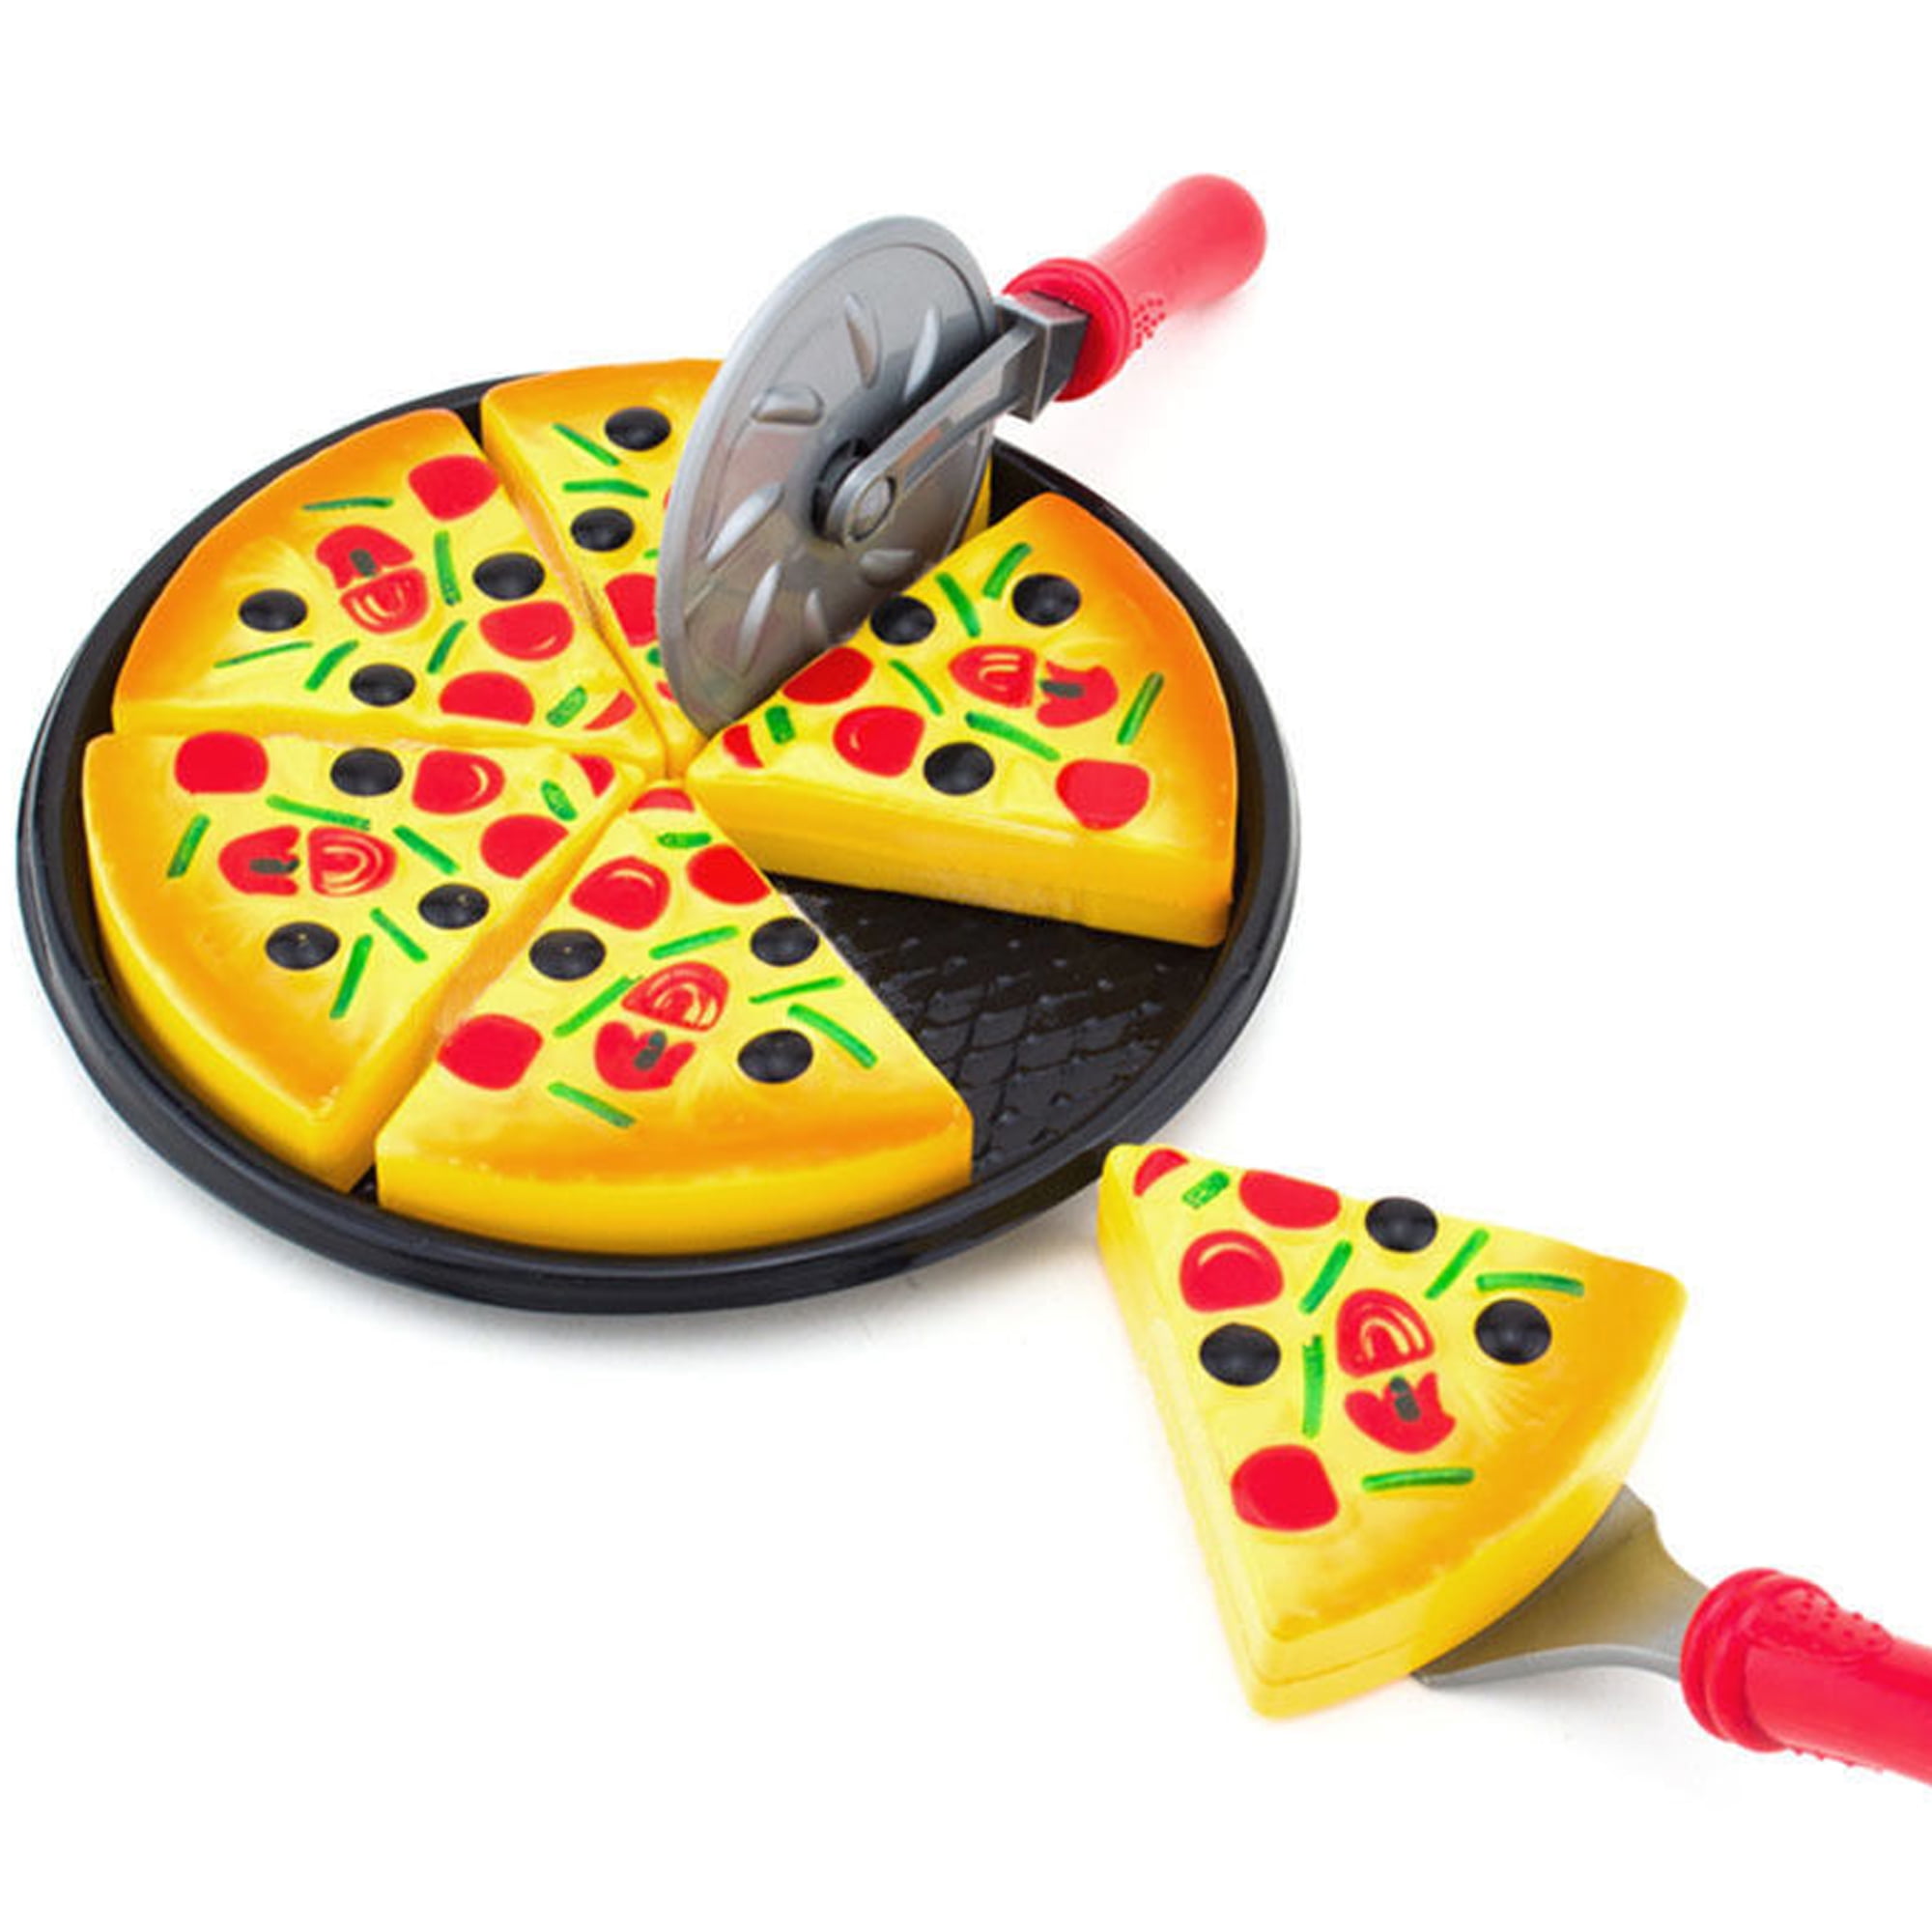 Details about   Pretend Play Kitchen Food PEPPERONI PIZZA PIE SLICE Veggies Realistic Prop #8 